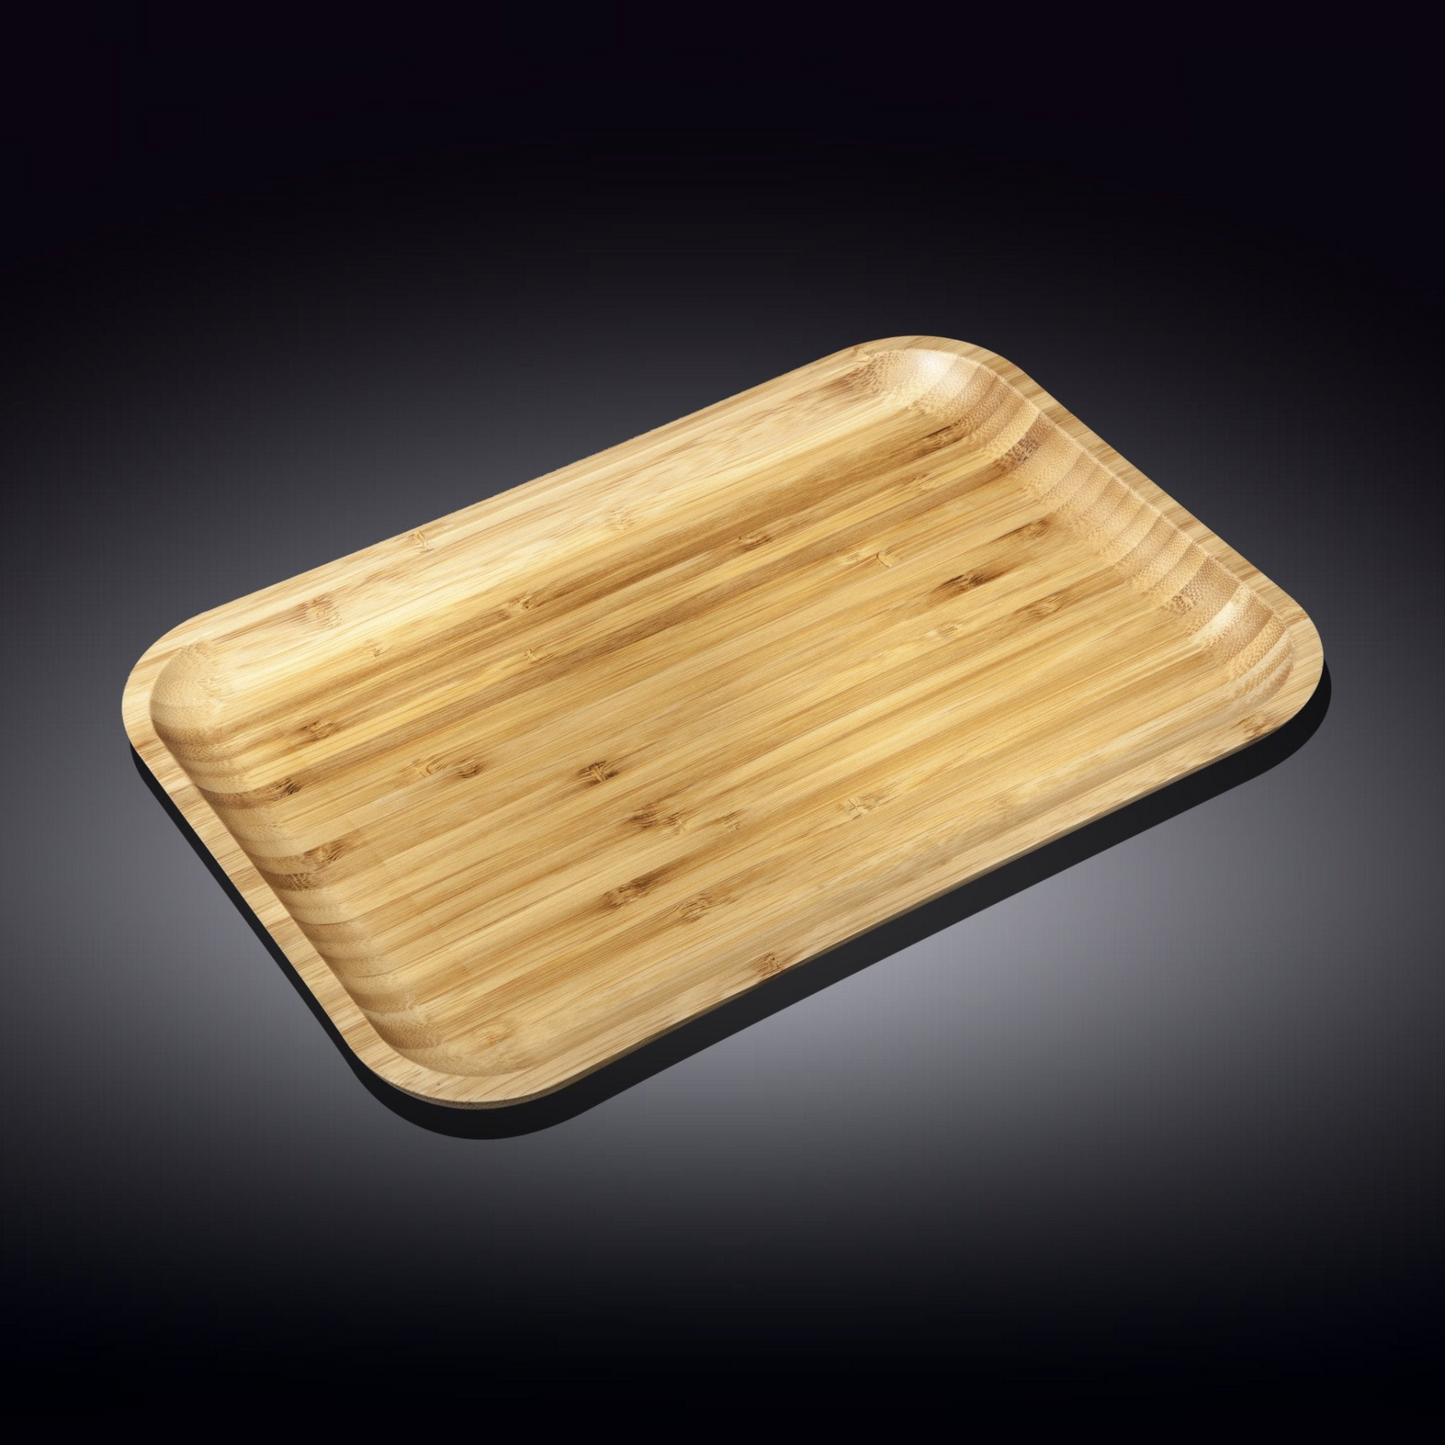 Wilmax Bamboo Wood Platter 12" X 8" | For Appetizers / Barbecue / Burger Sliders    WL-771054/A